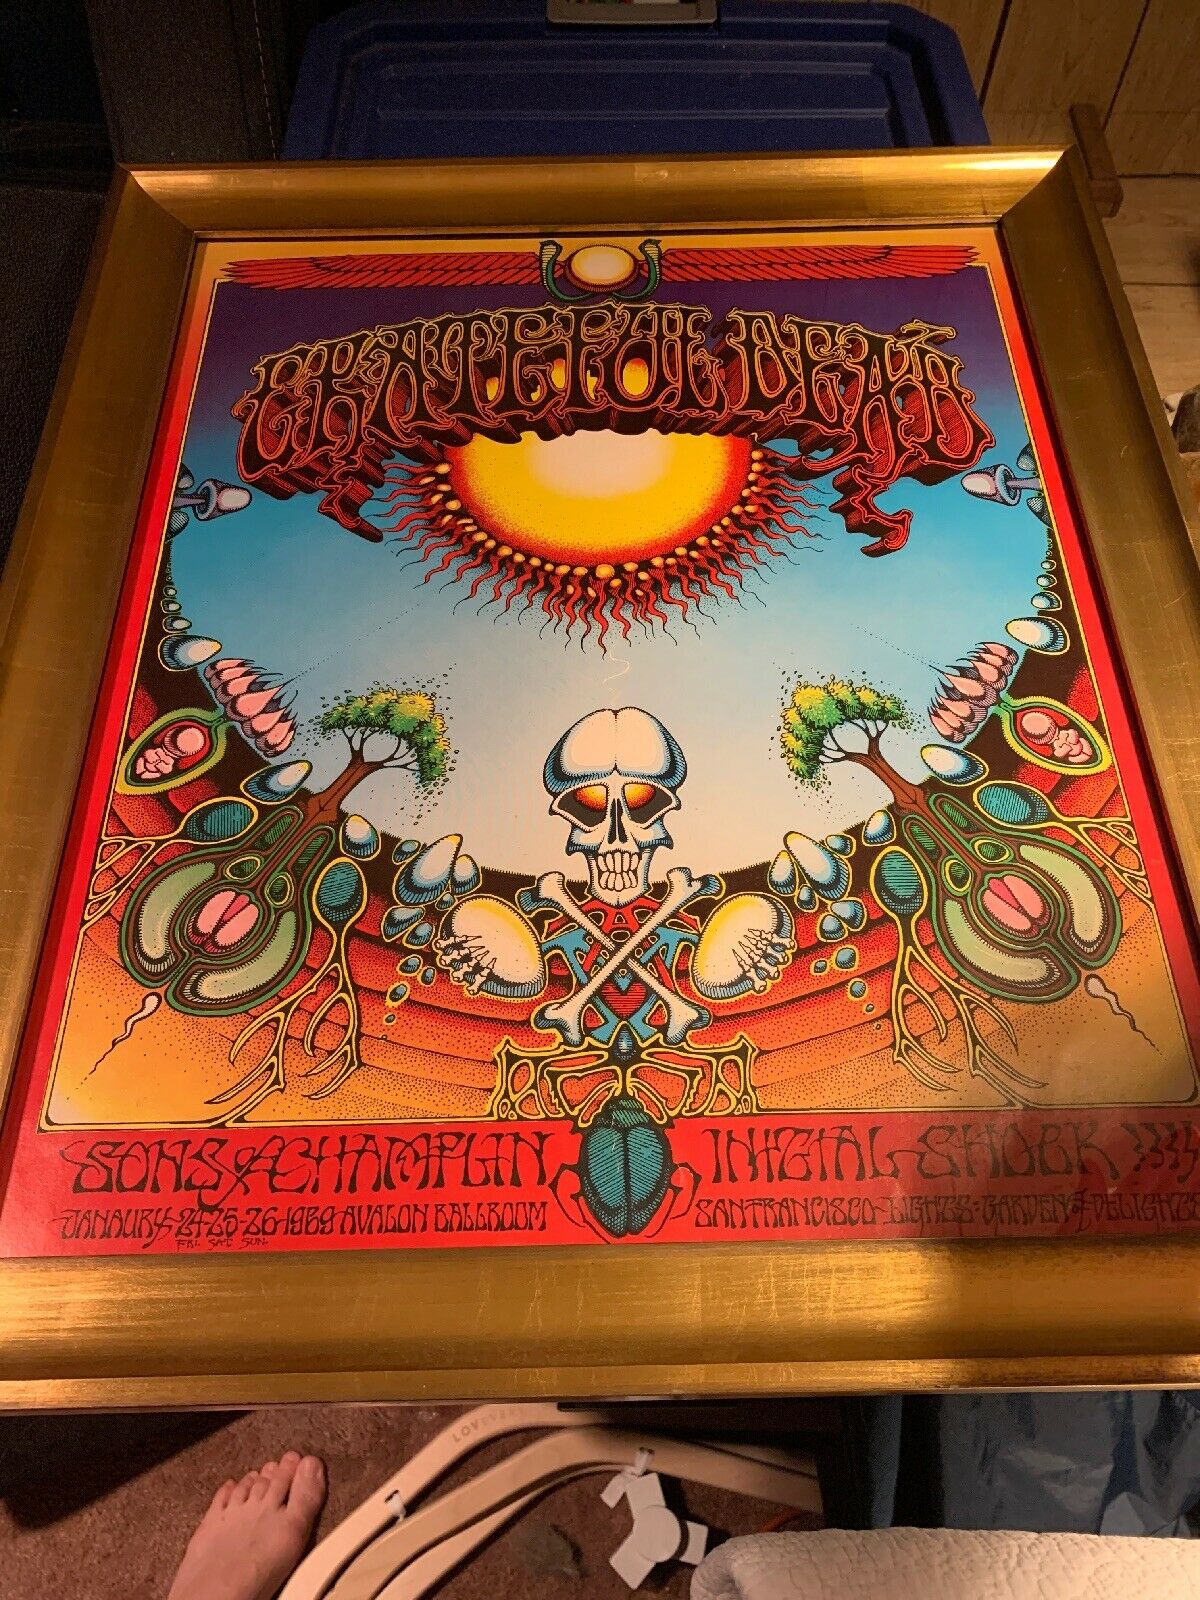 Aoxomoxoa First Printing Poster Of Grateful Dead By Rick Griffin